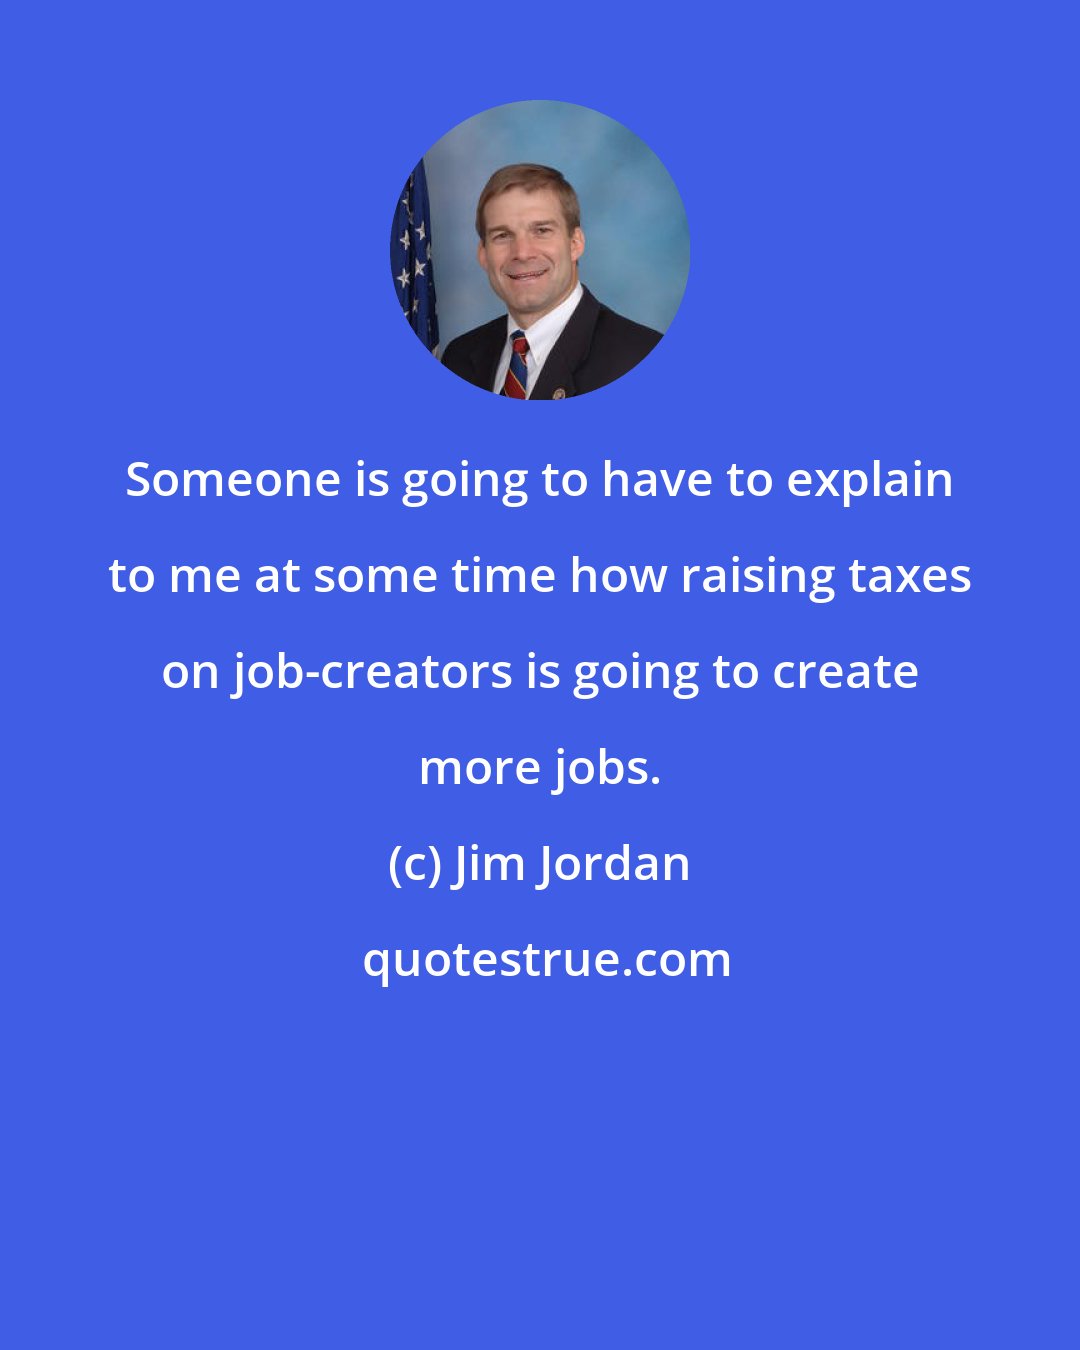 Jim Jordan: Someone is going to have to explain to me at some time how raising taxes on job-creators is going to create more jobs.